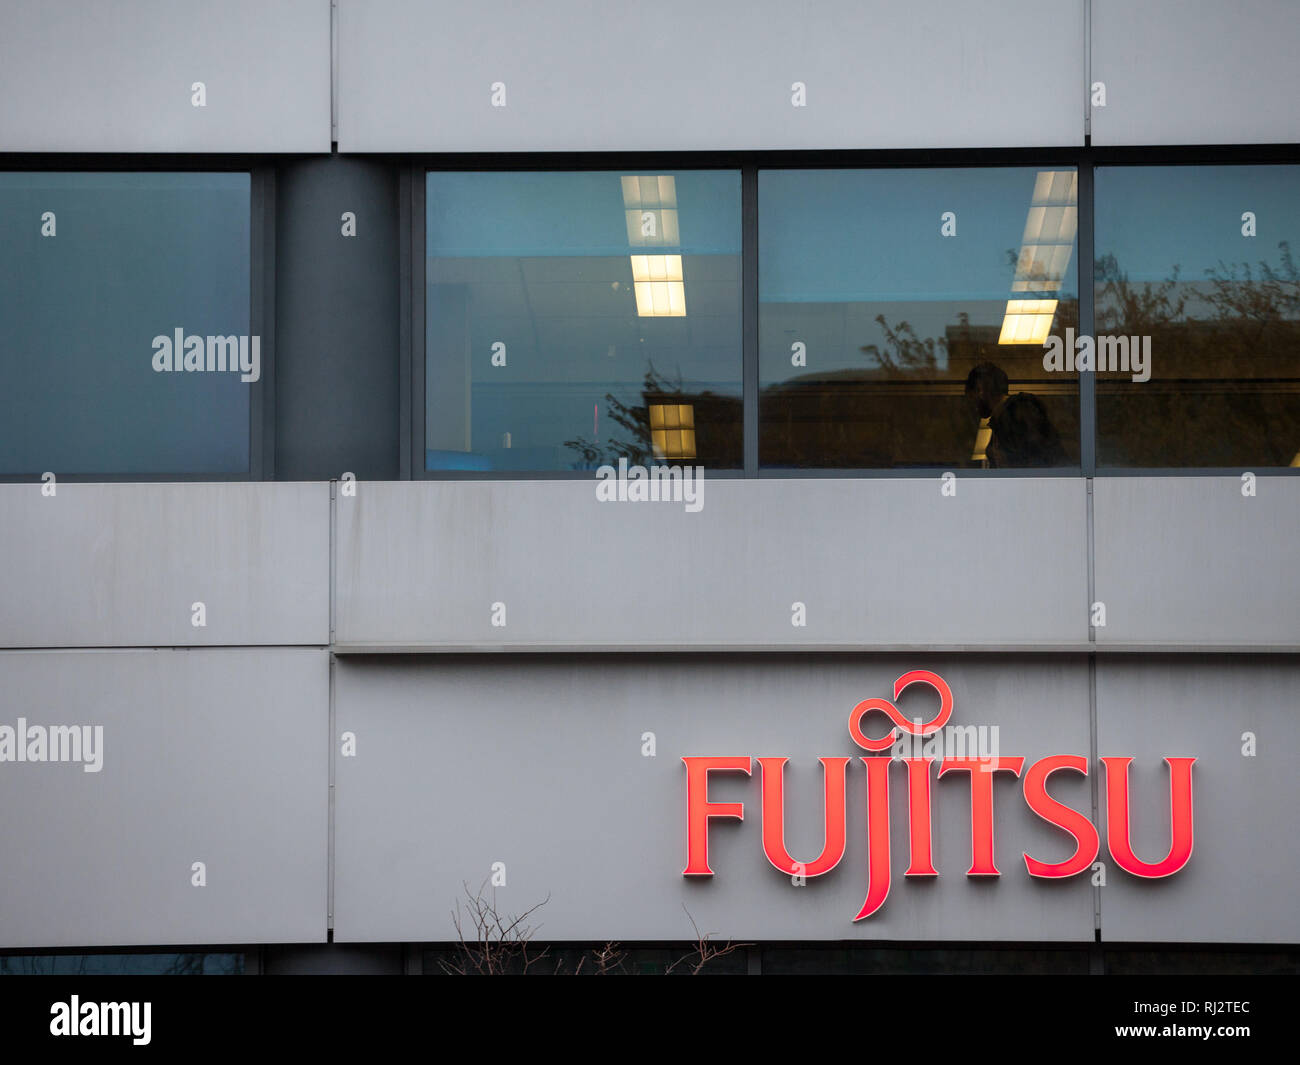 MONTREAL, CANADA - NOVEMBER 9, 2018: Fujitsu Bank logo on their main office for Montreal, Quebec. Fujitsu is a Japanese computer and IT equipment bran Stock Photo